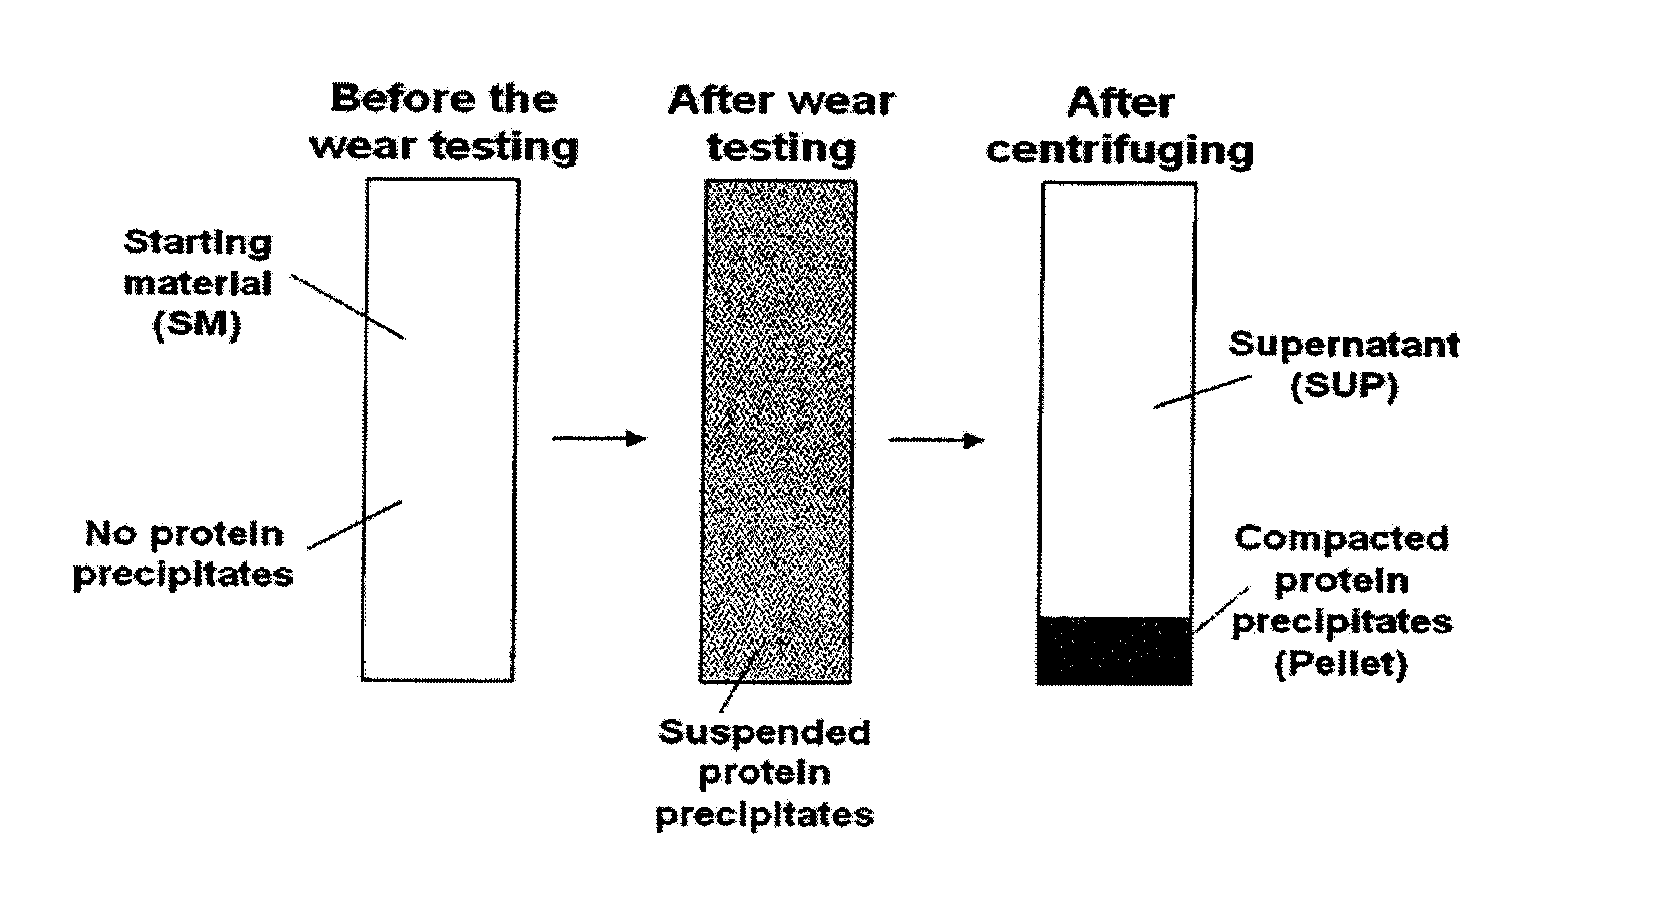 Lubricant for wear testing of joint replacements and associated materials